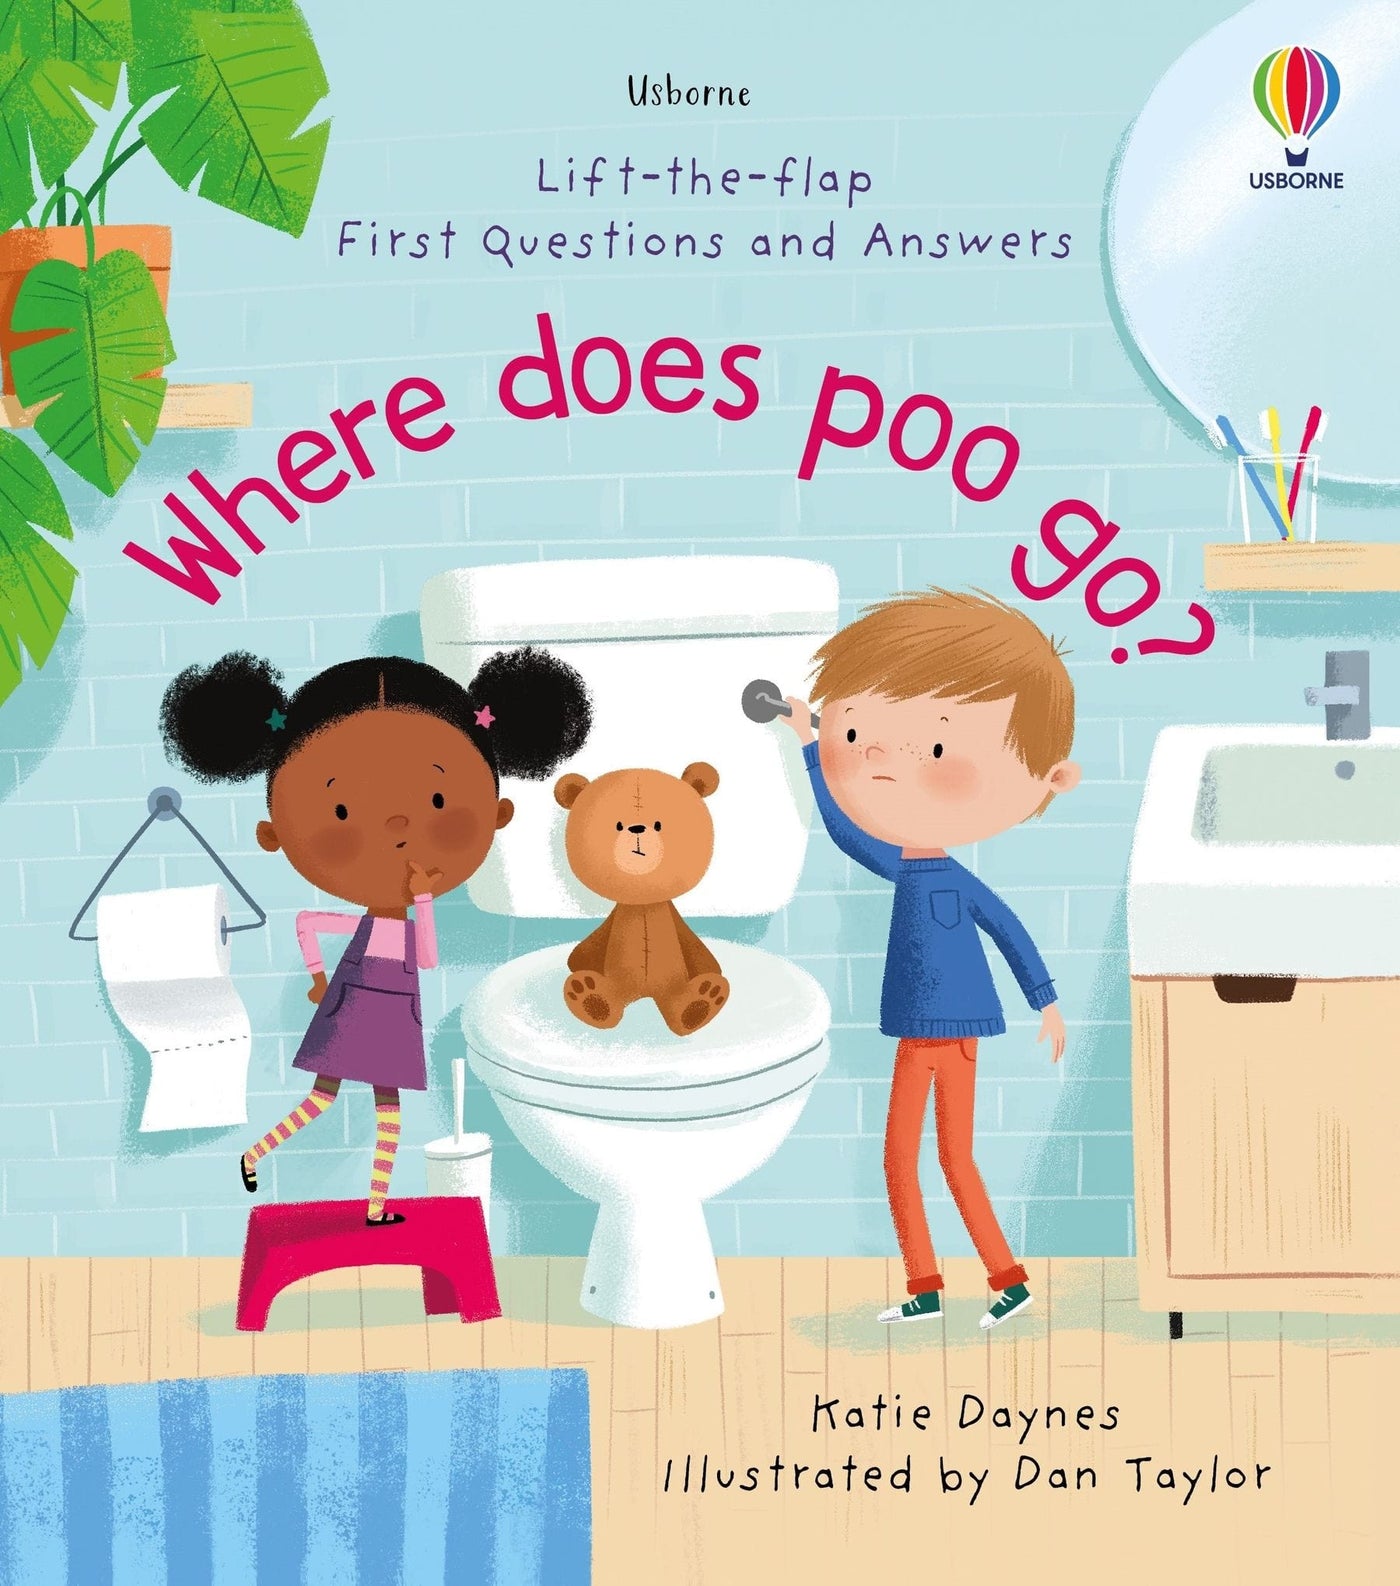 Where Does Poo Go? - Lift-the-Flap, First Questions and Answers - Board Book | Usborne Books by Usborne Books UK Book